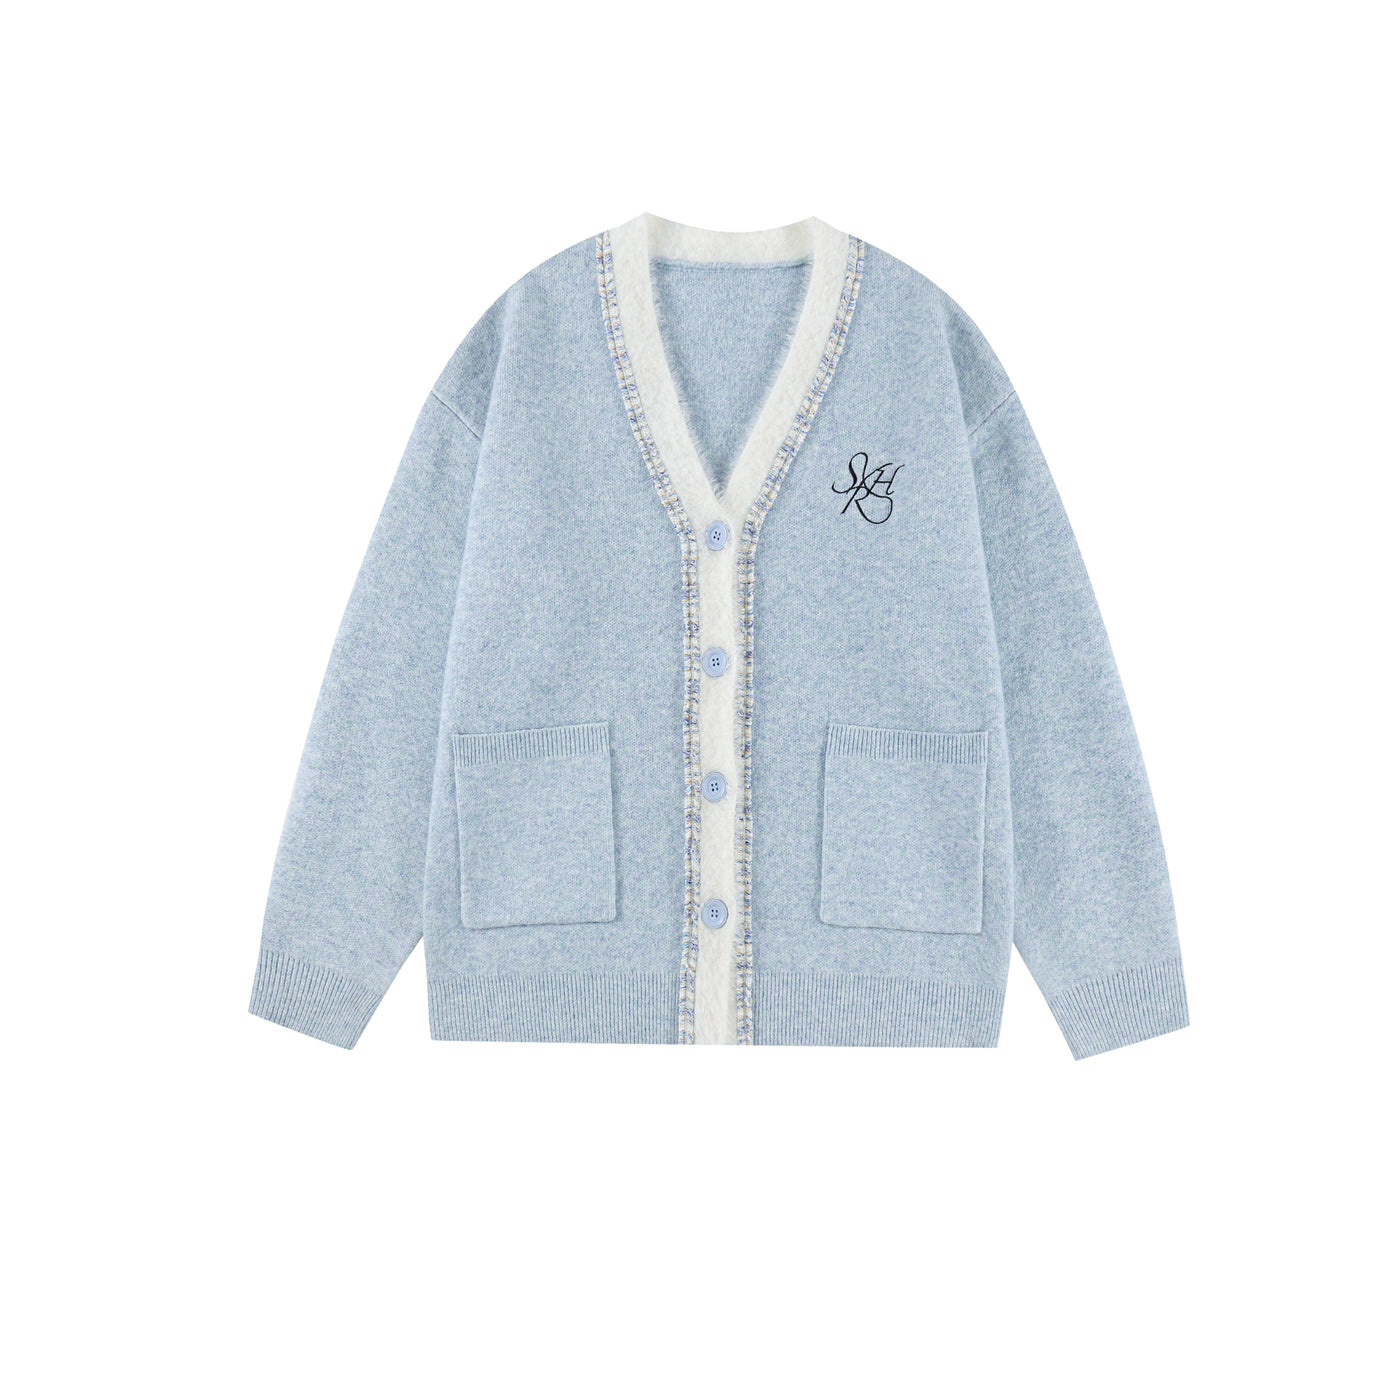 Fairy colored girly cardigan SPE0015